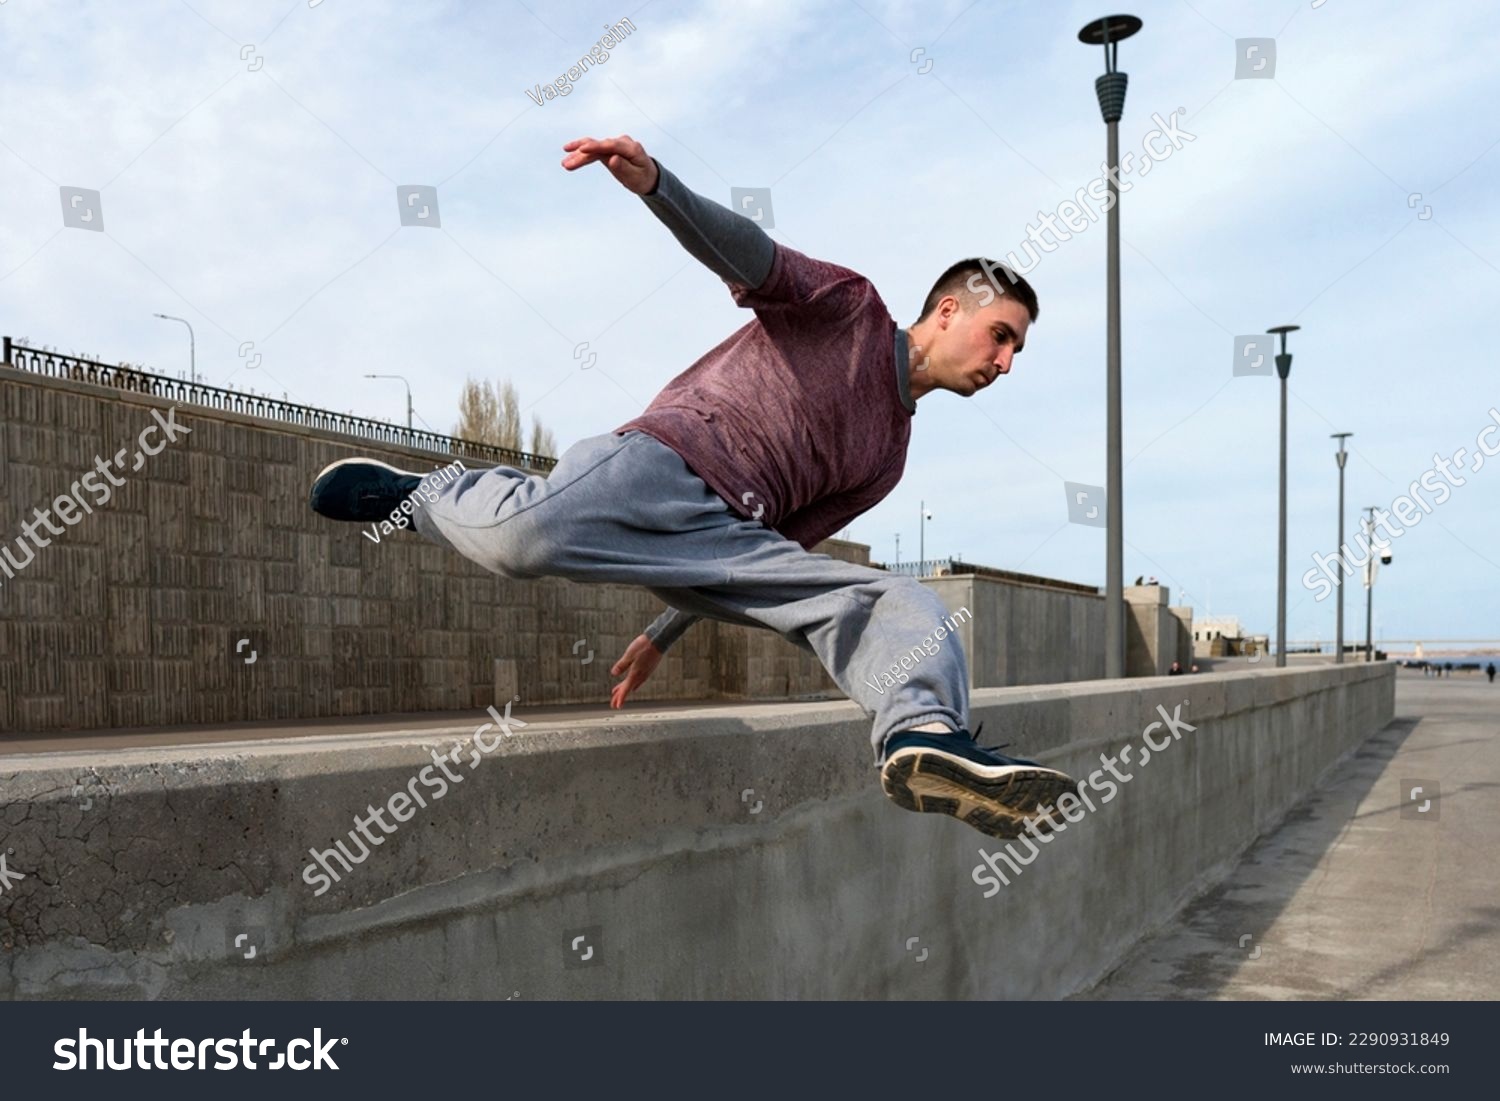 Sports man doing parkour. Parkour athlete training in city in sportive clothes. Free runner jumping have workout at daytime. #2290931849